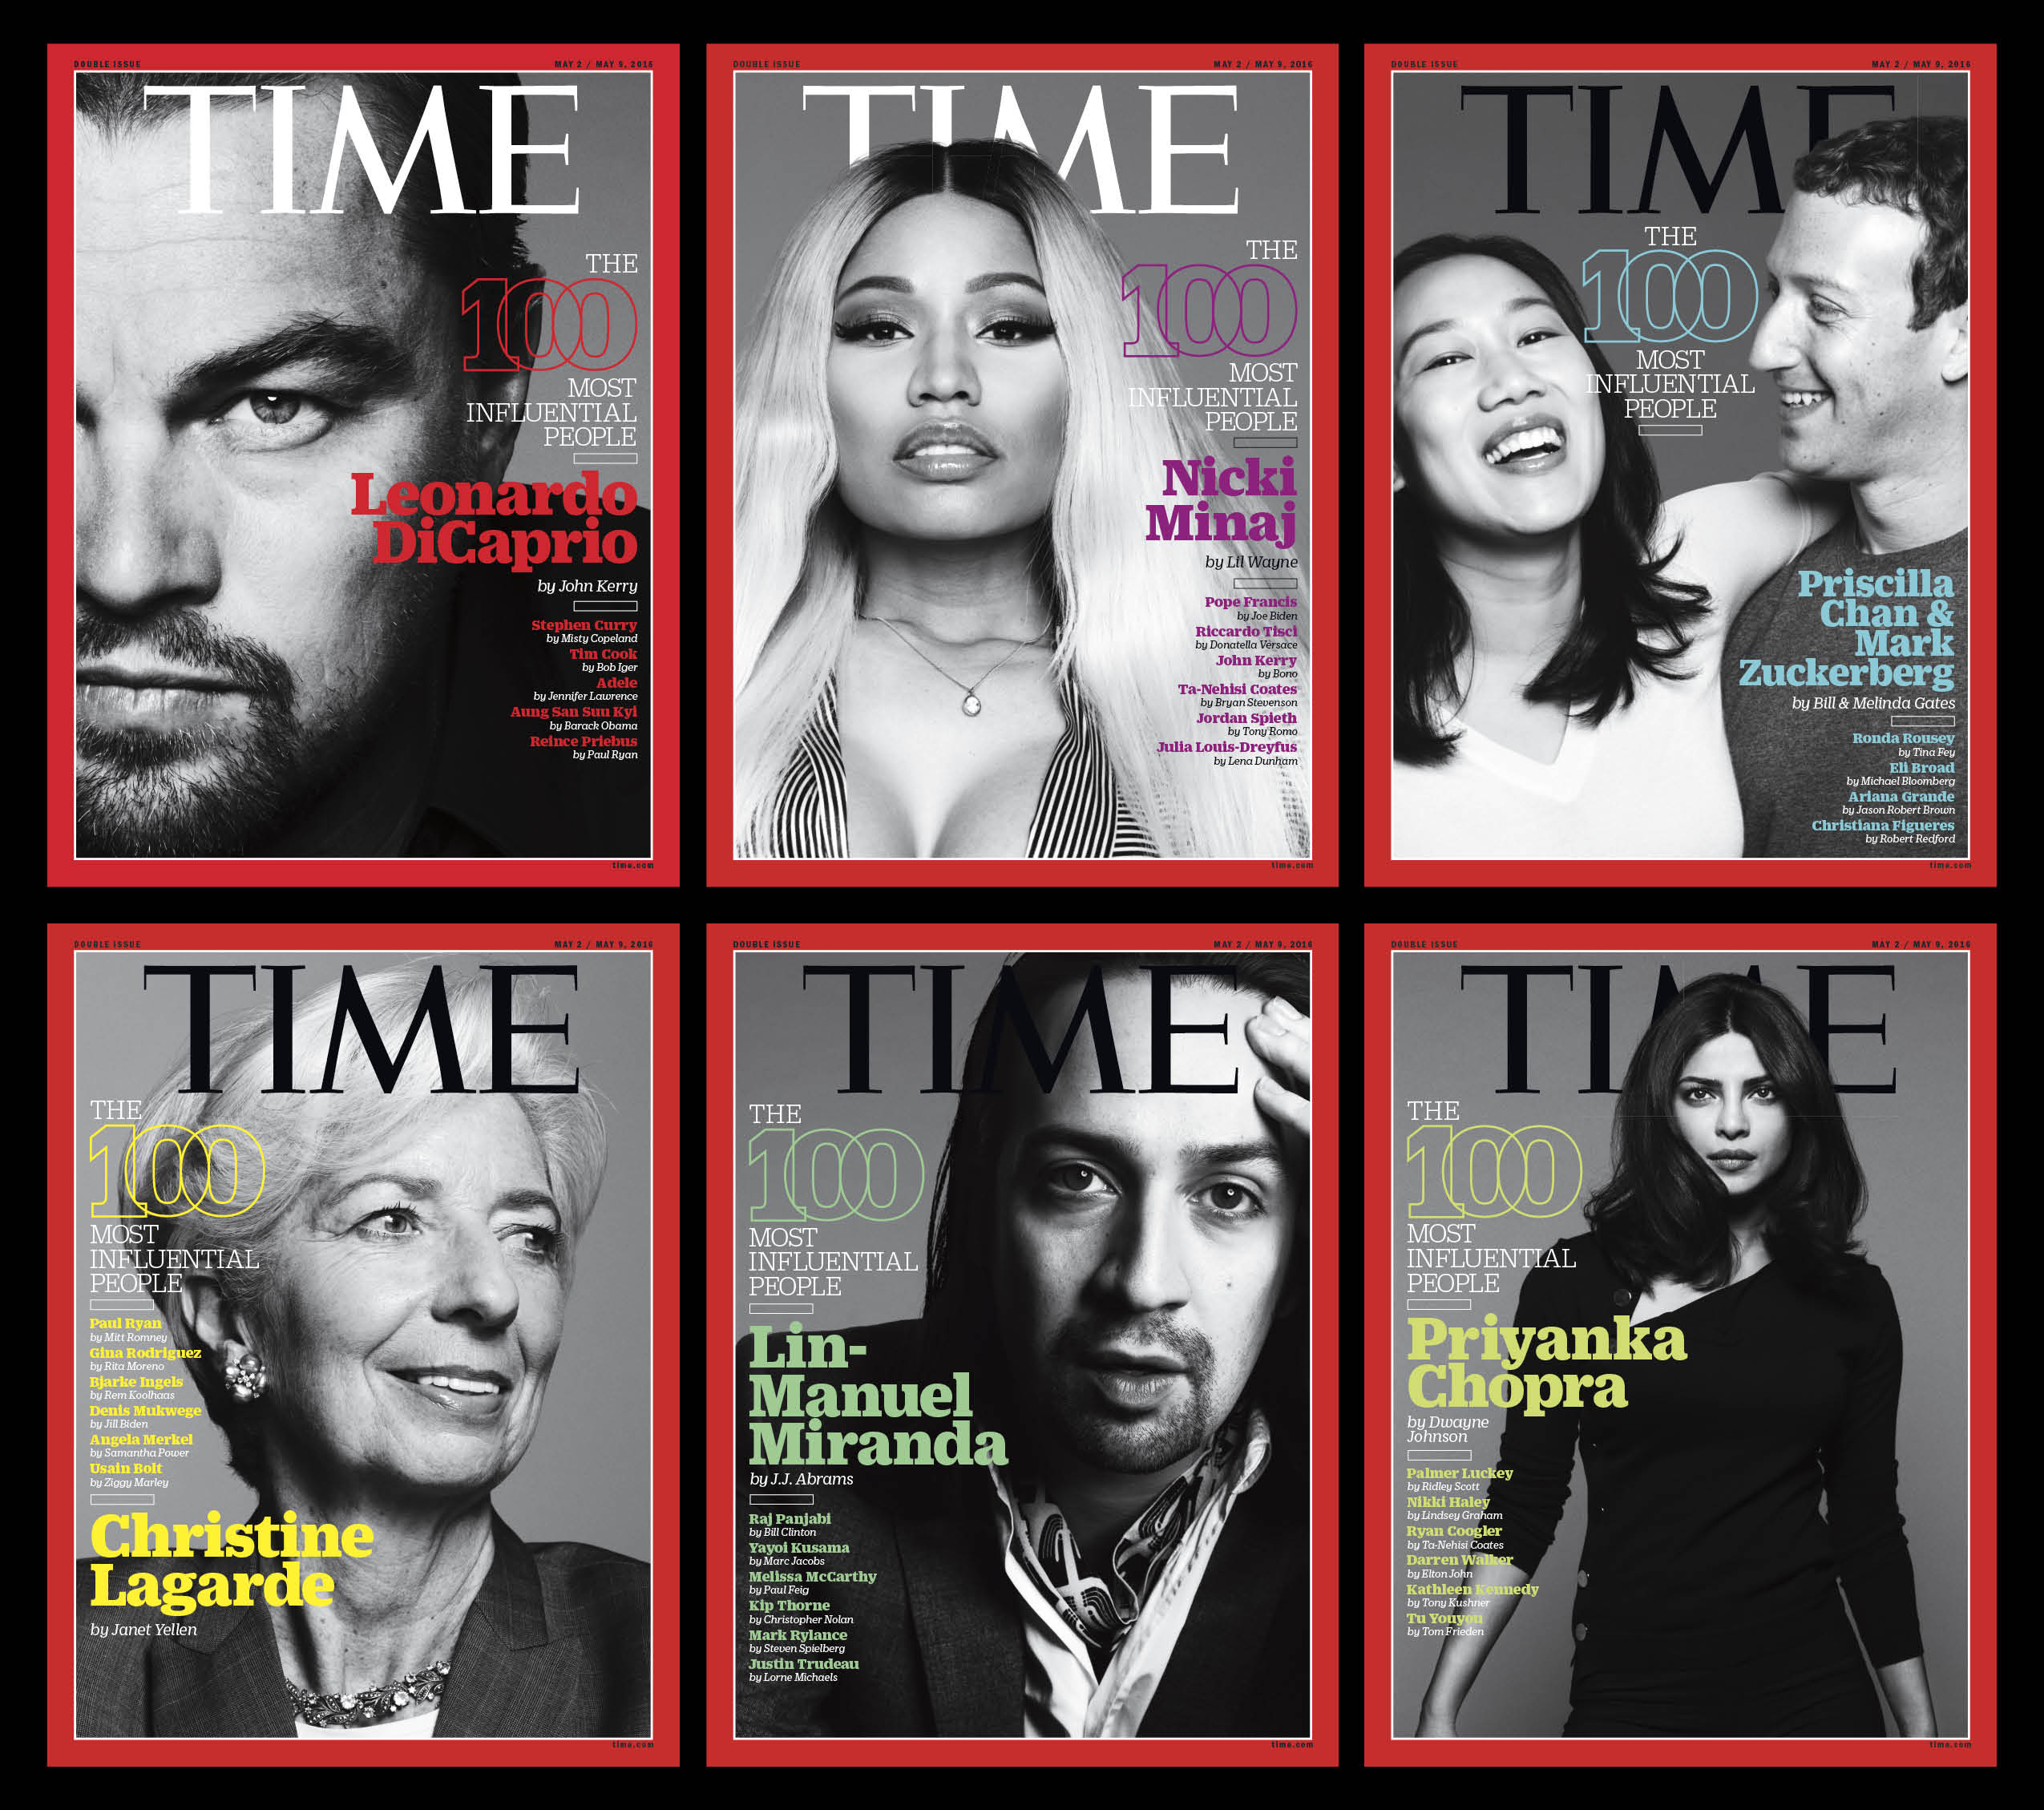 Time 100 cover (2016).Image: Courtesy of Time.com.